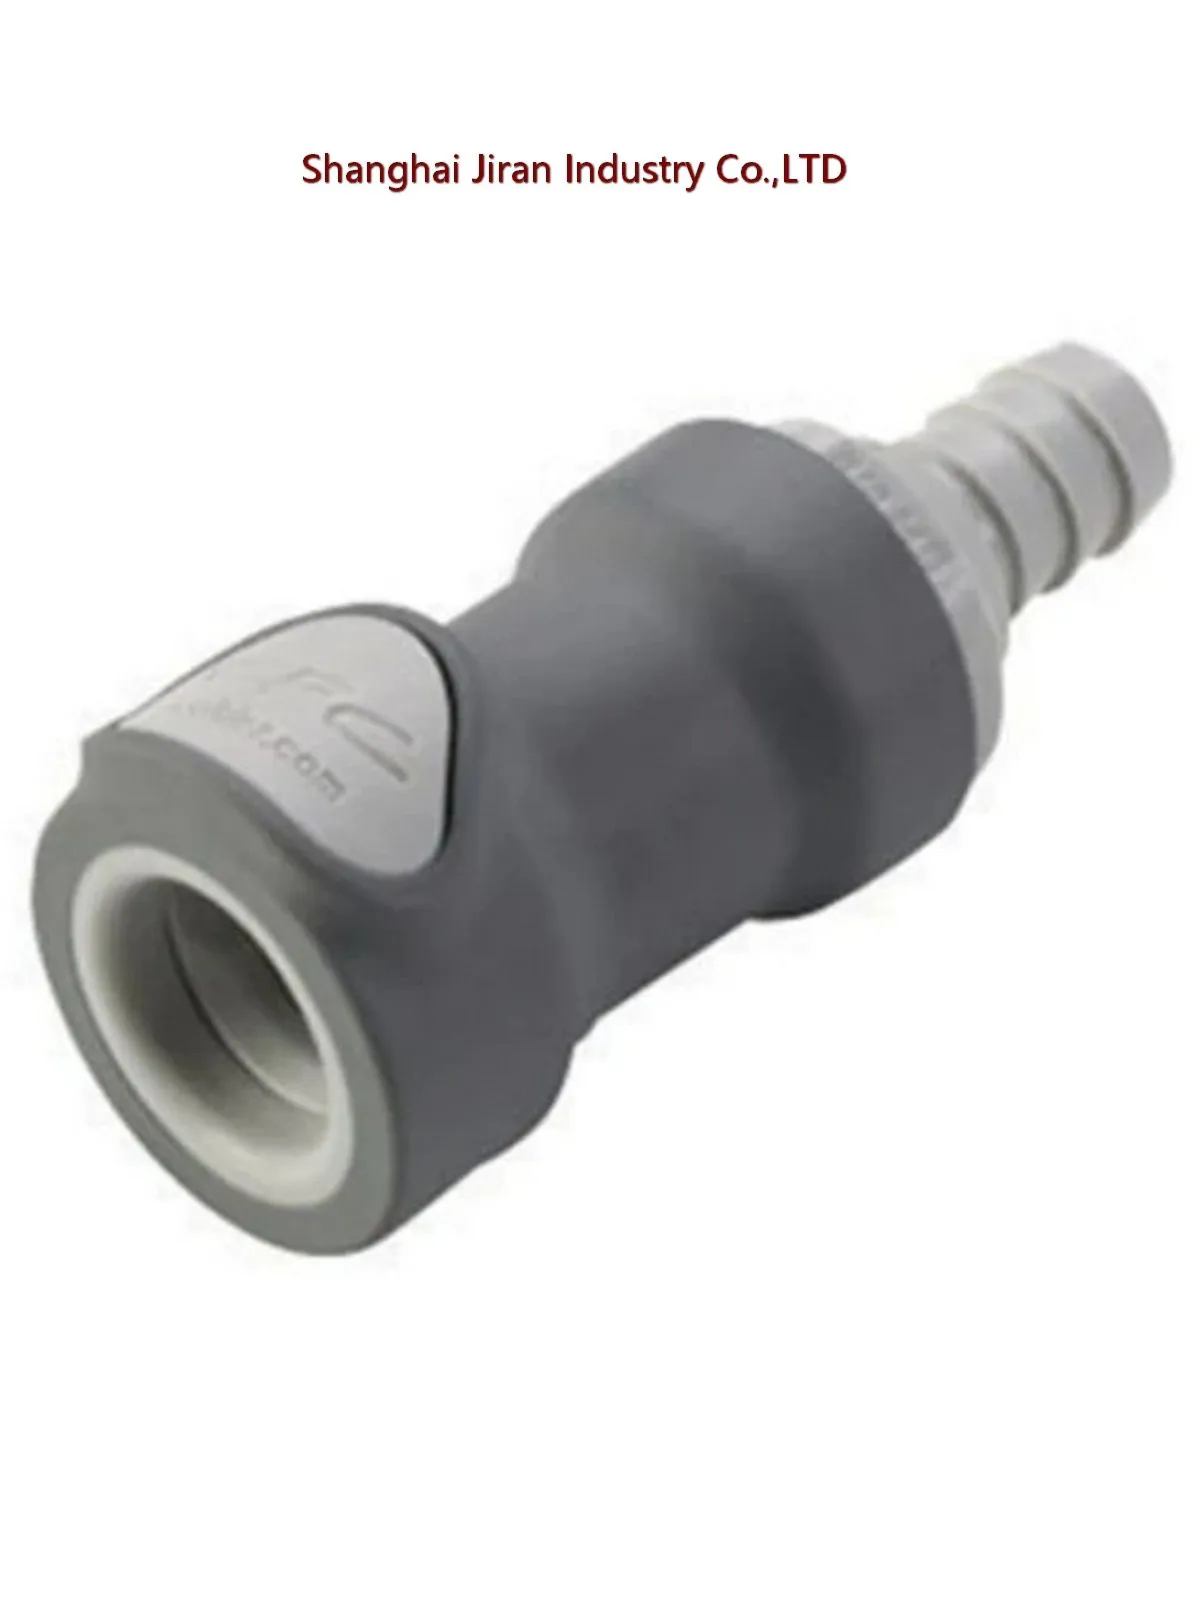 

CPC NS4D17004 Valved In-Line Hose Barb Coupling Body 1/4 ID Barb